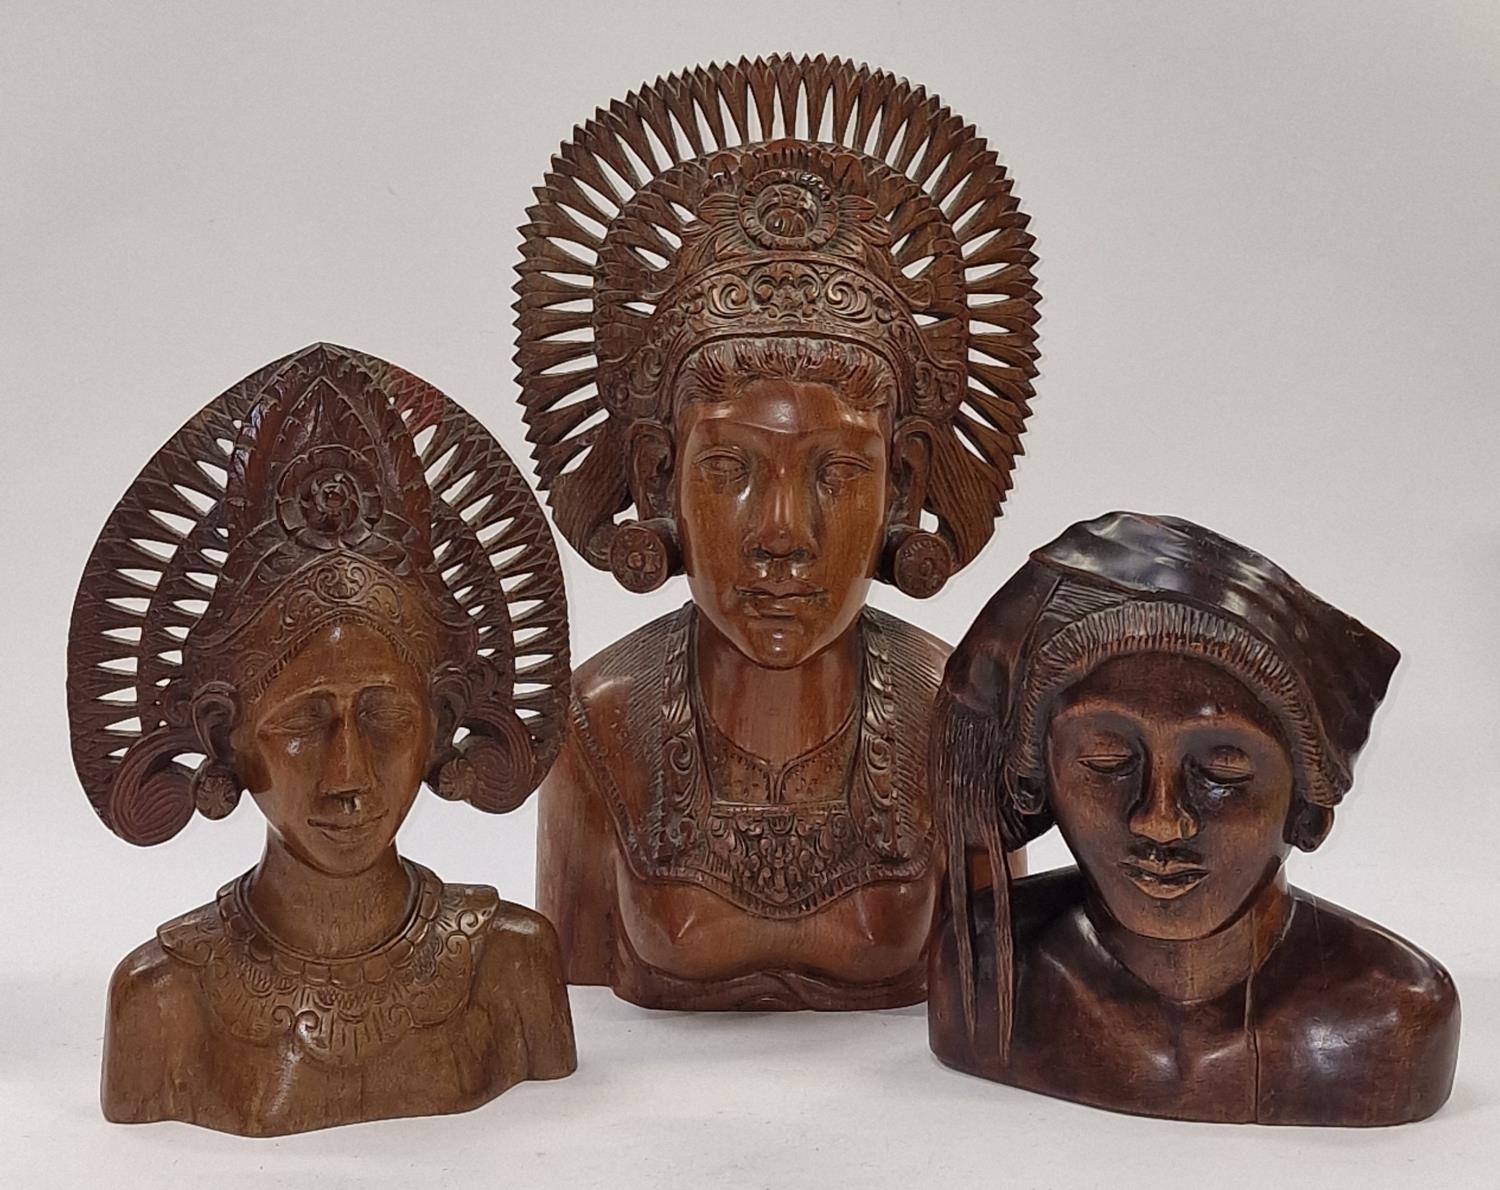 Collection of Indonesian wooden carved busts of varying sizes.